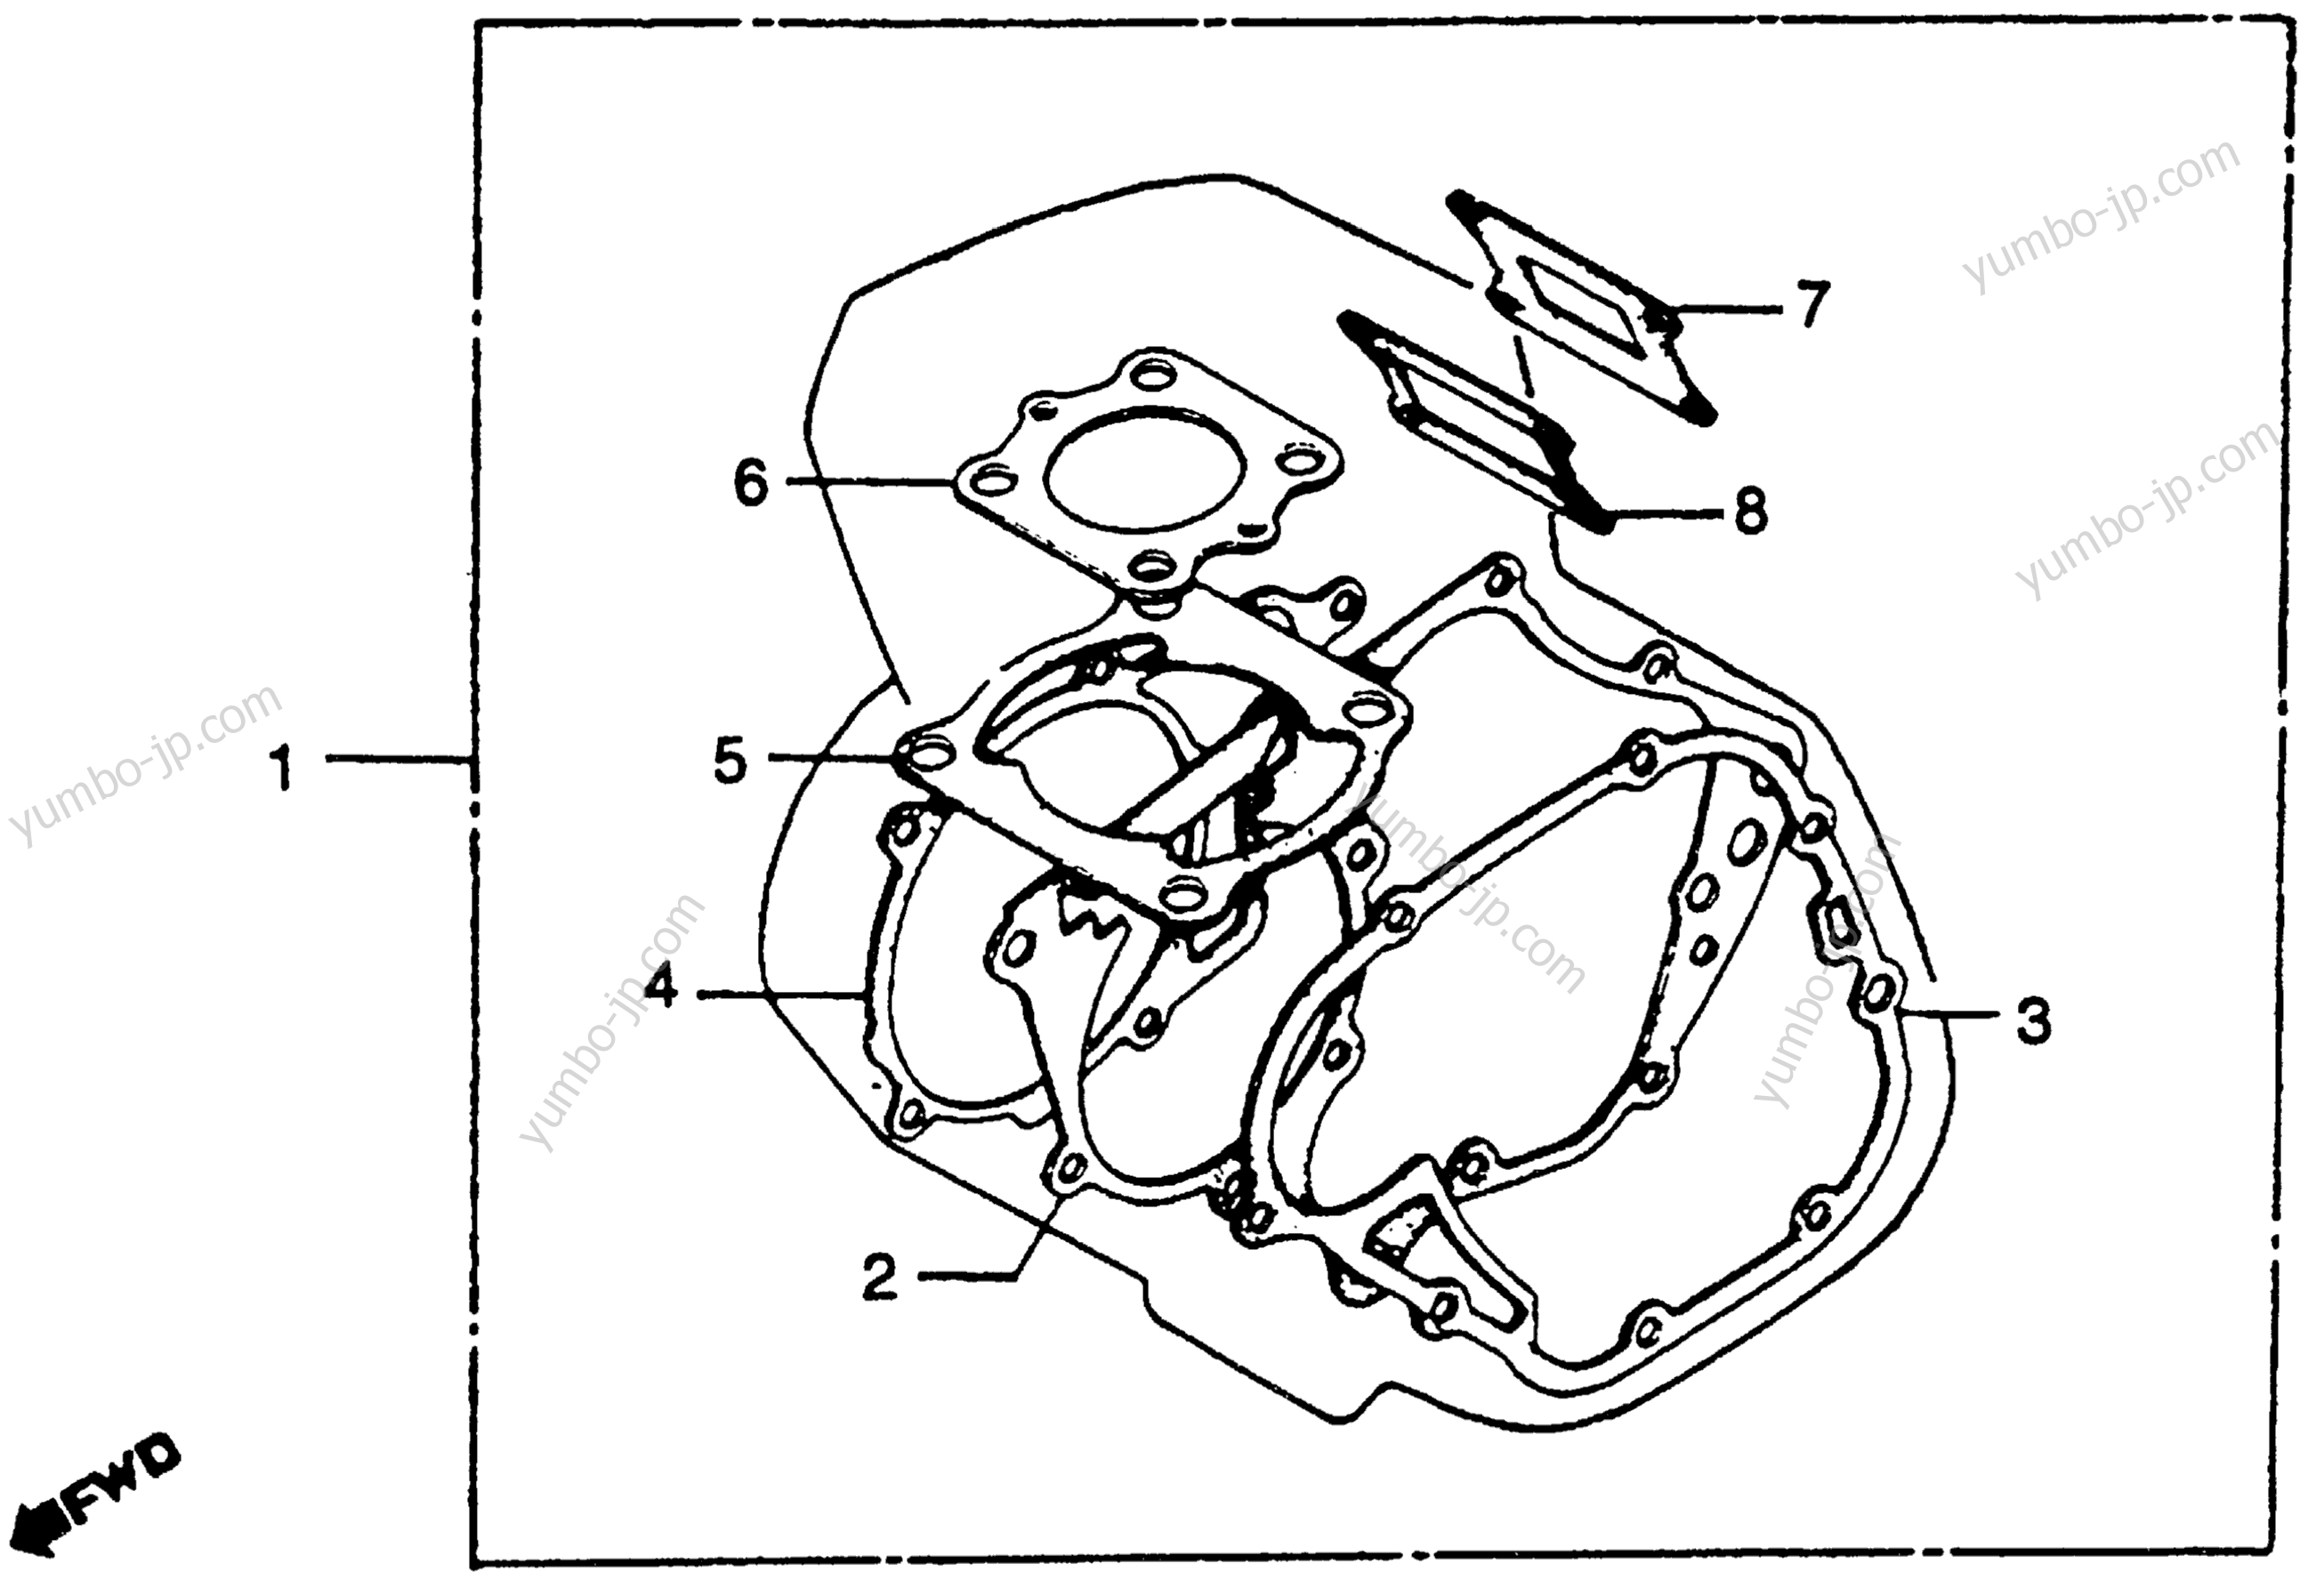 GASKET SET for motorcycles HONDA CR125R A 1979 year